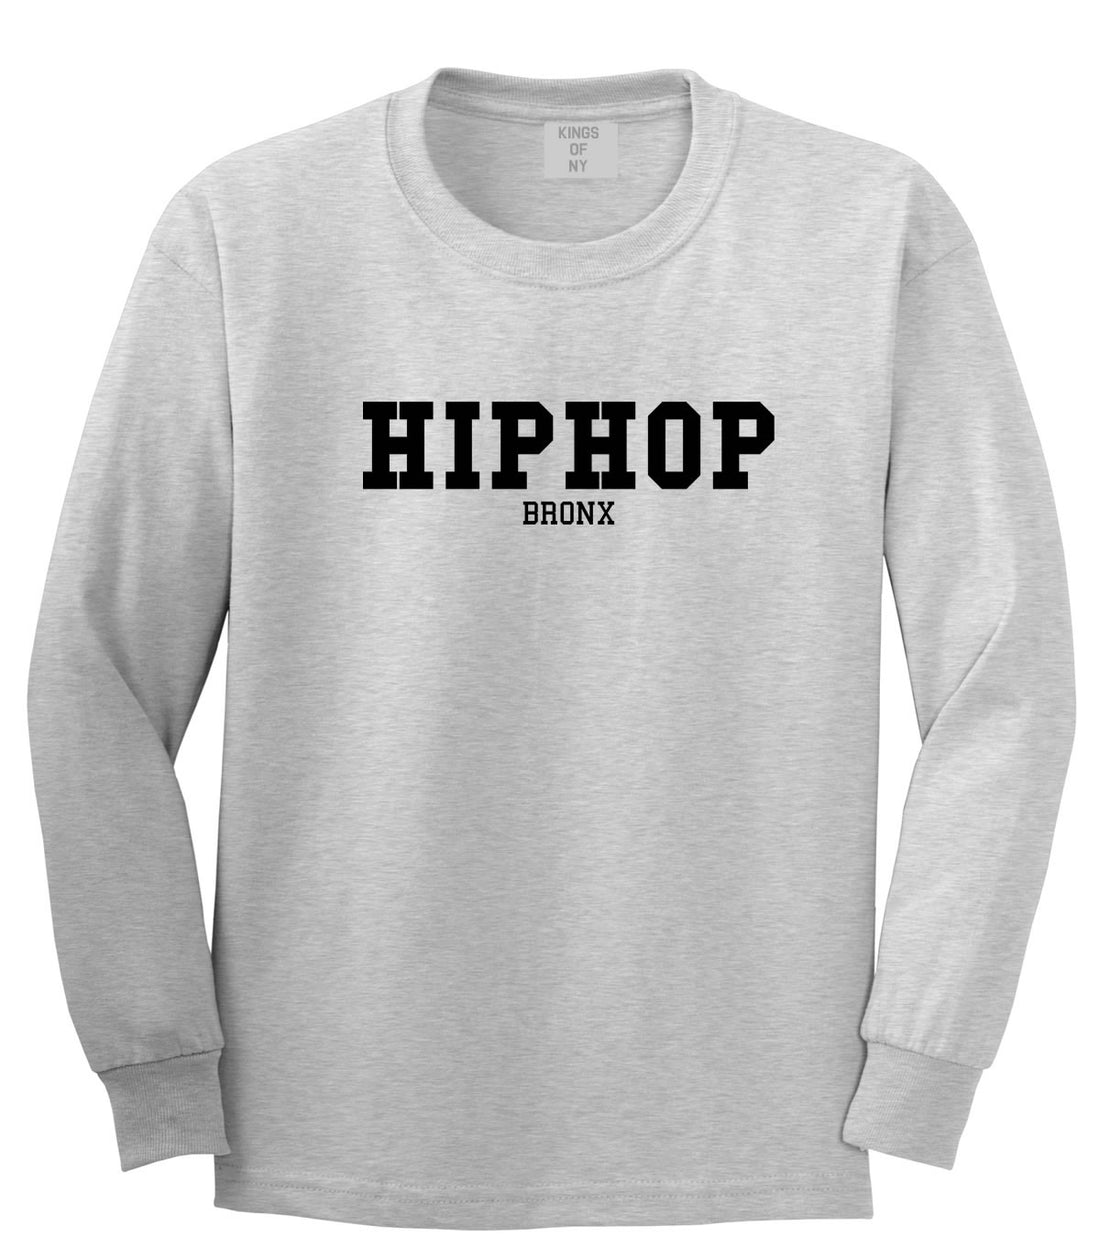 Hiphop the Bronx Long Sleeve T-Shirt in Grey by Kings Of NY